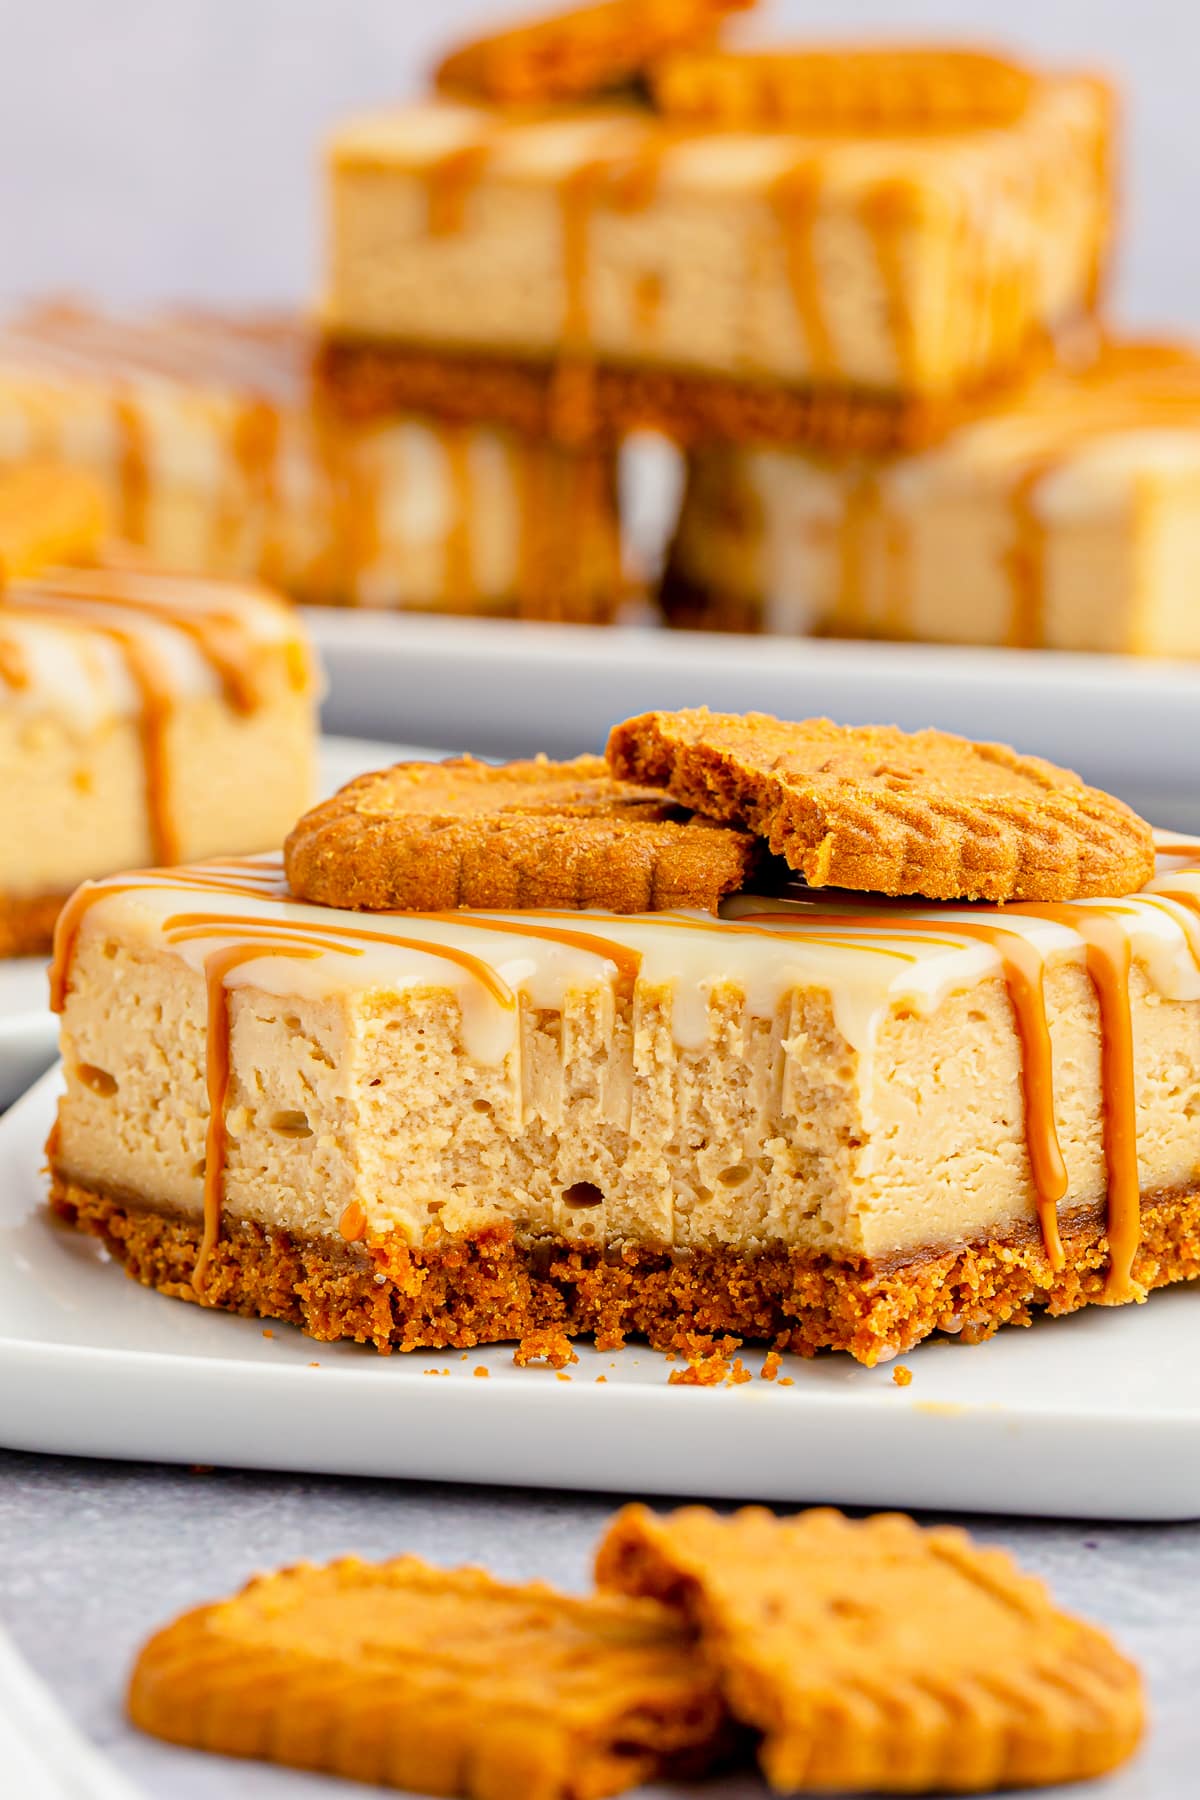 Interior photos of one of the Biscoff Cheesecake Bars on a white plate, more cheesecake bars in the background